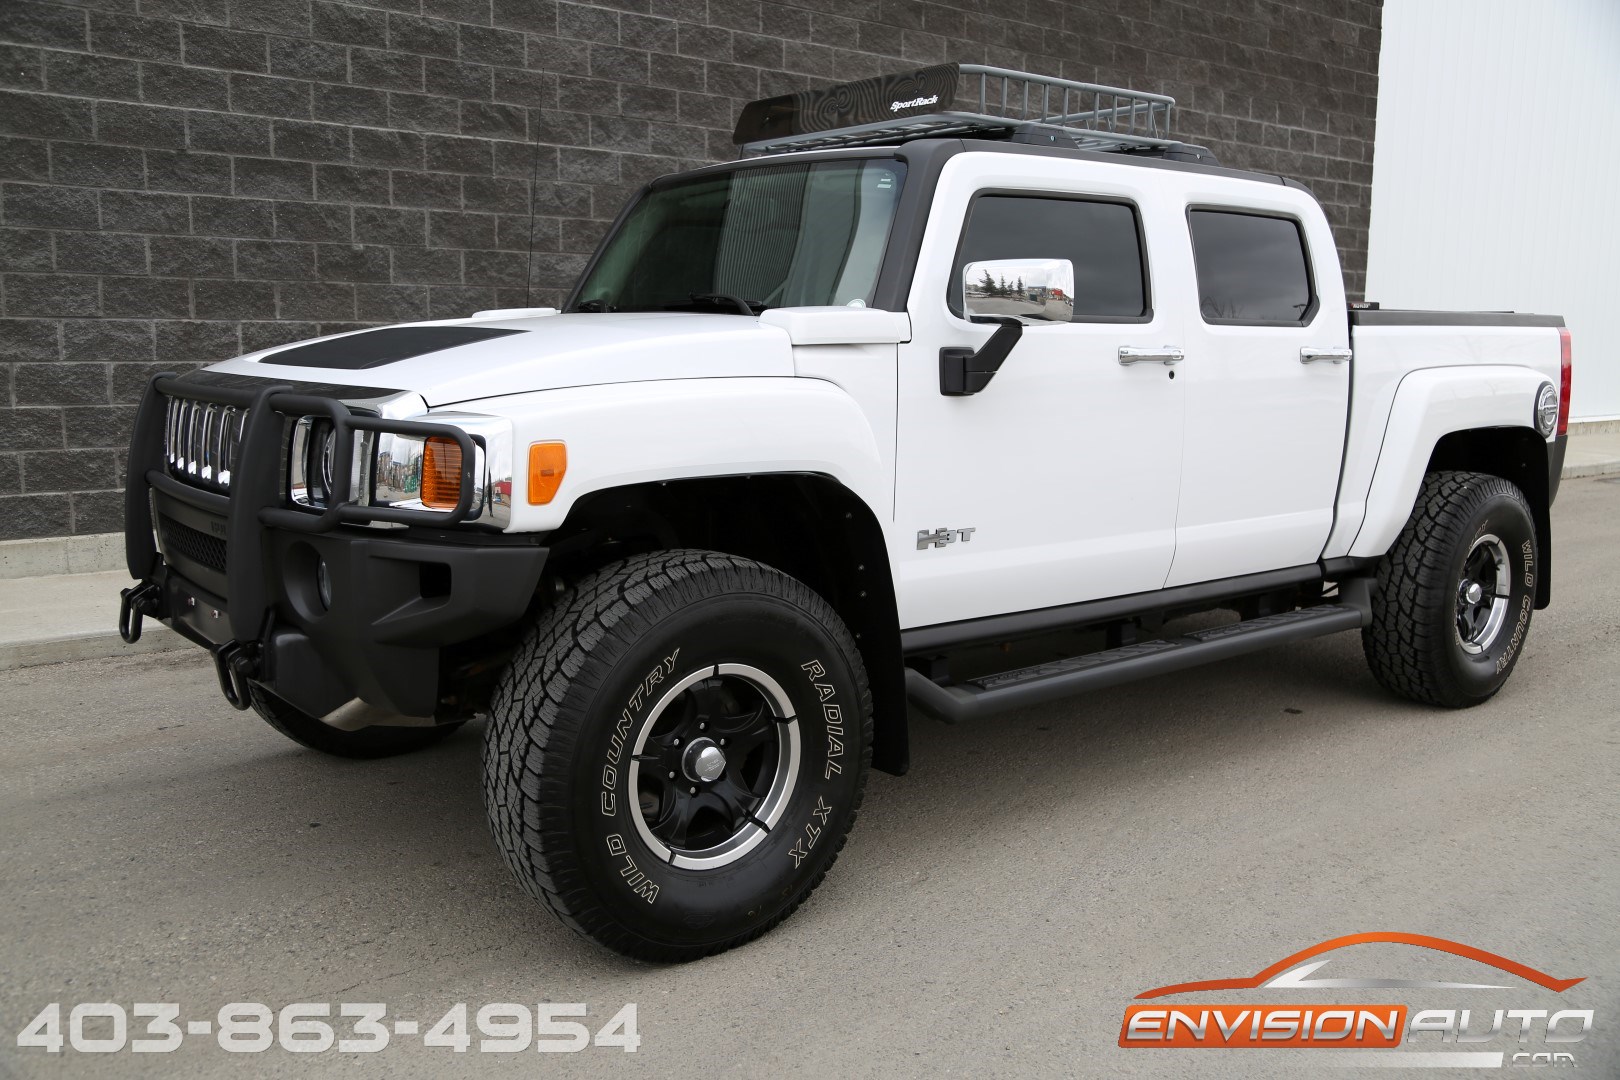 2010 H3T Hummer Truck – Aftermarket Extras! - Envision Auto1620 x 1080